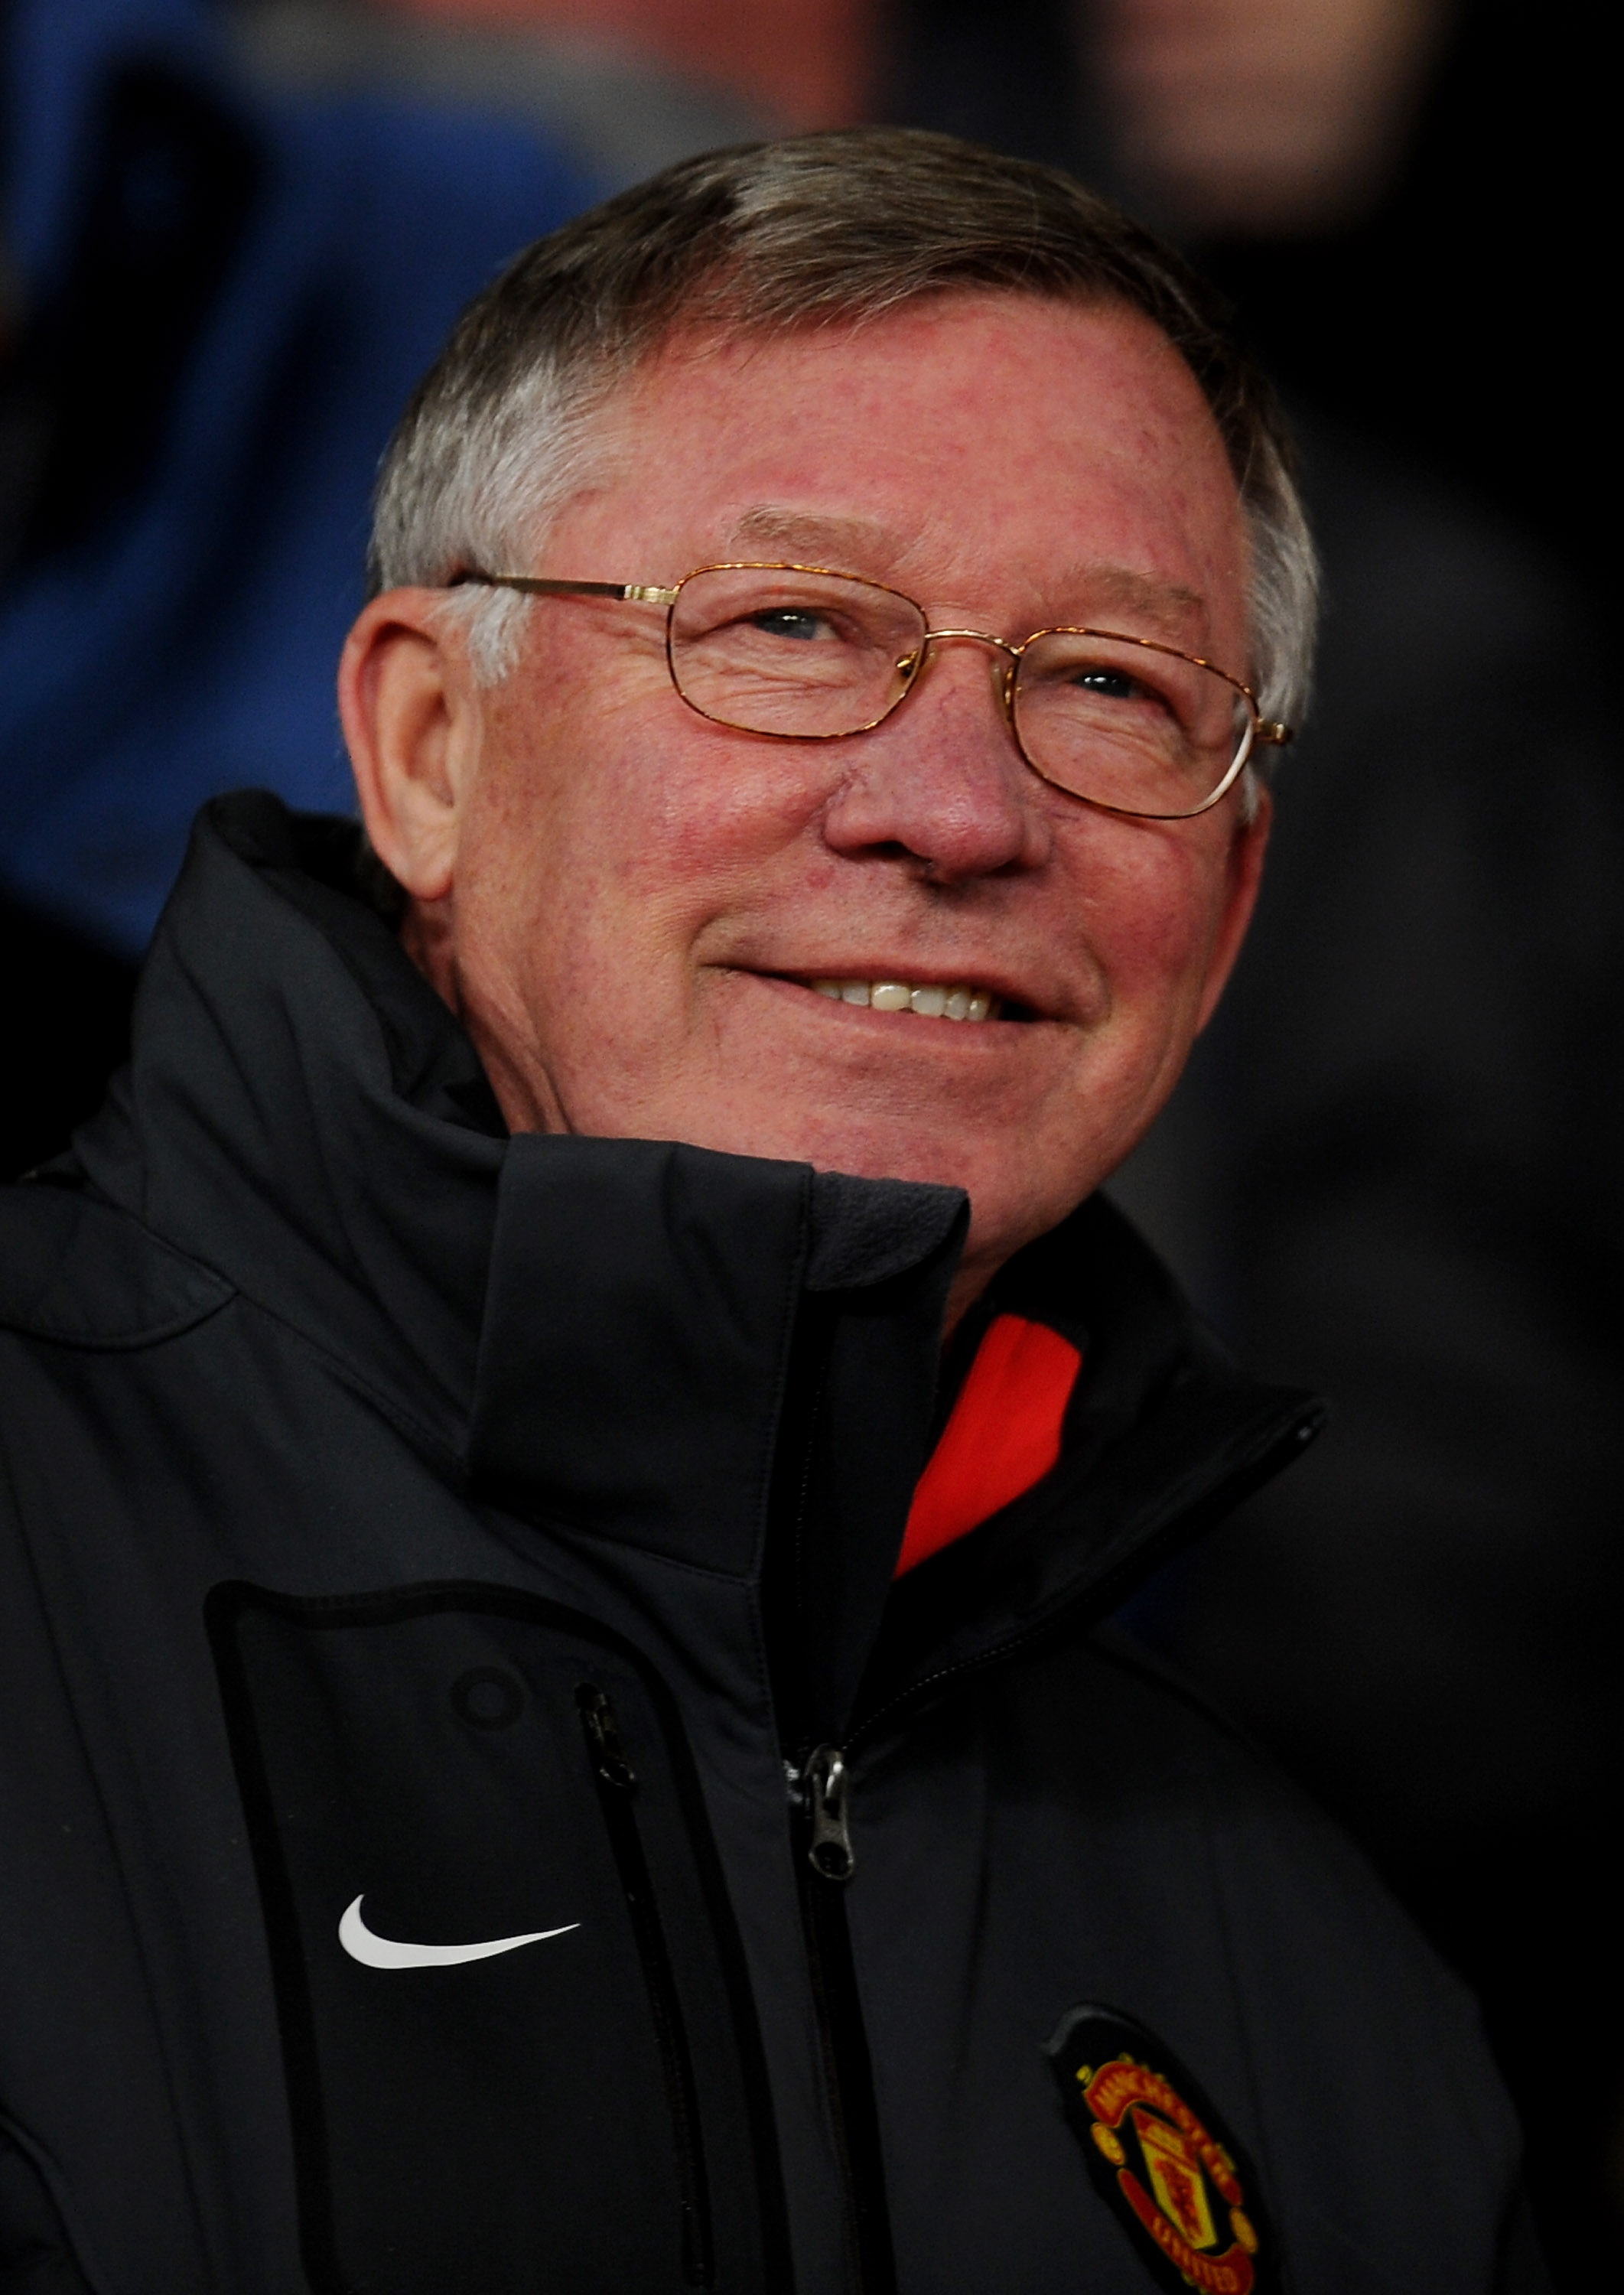 MANCHESTER, ENGLAND - DECEMBER 07:  Manchester United Manager Sir Alex Ferguson looks on prior to the UEFA Champions League Group C match between Manchester United and Valencia at Old Trafford on December 7, 2010 in Manchester, England.  (Photo by Clive M